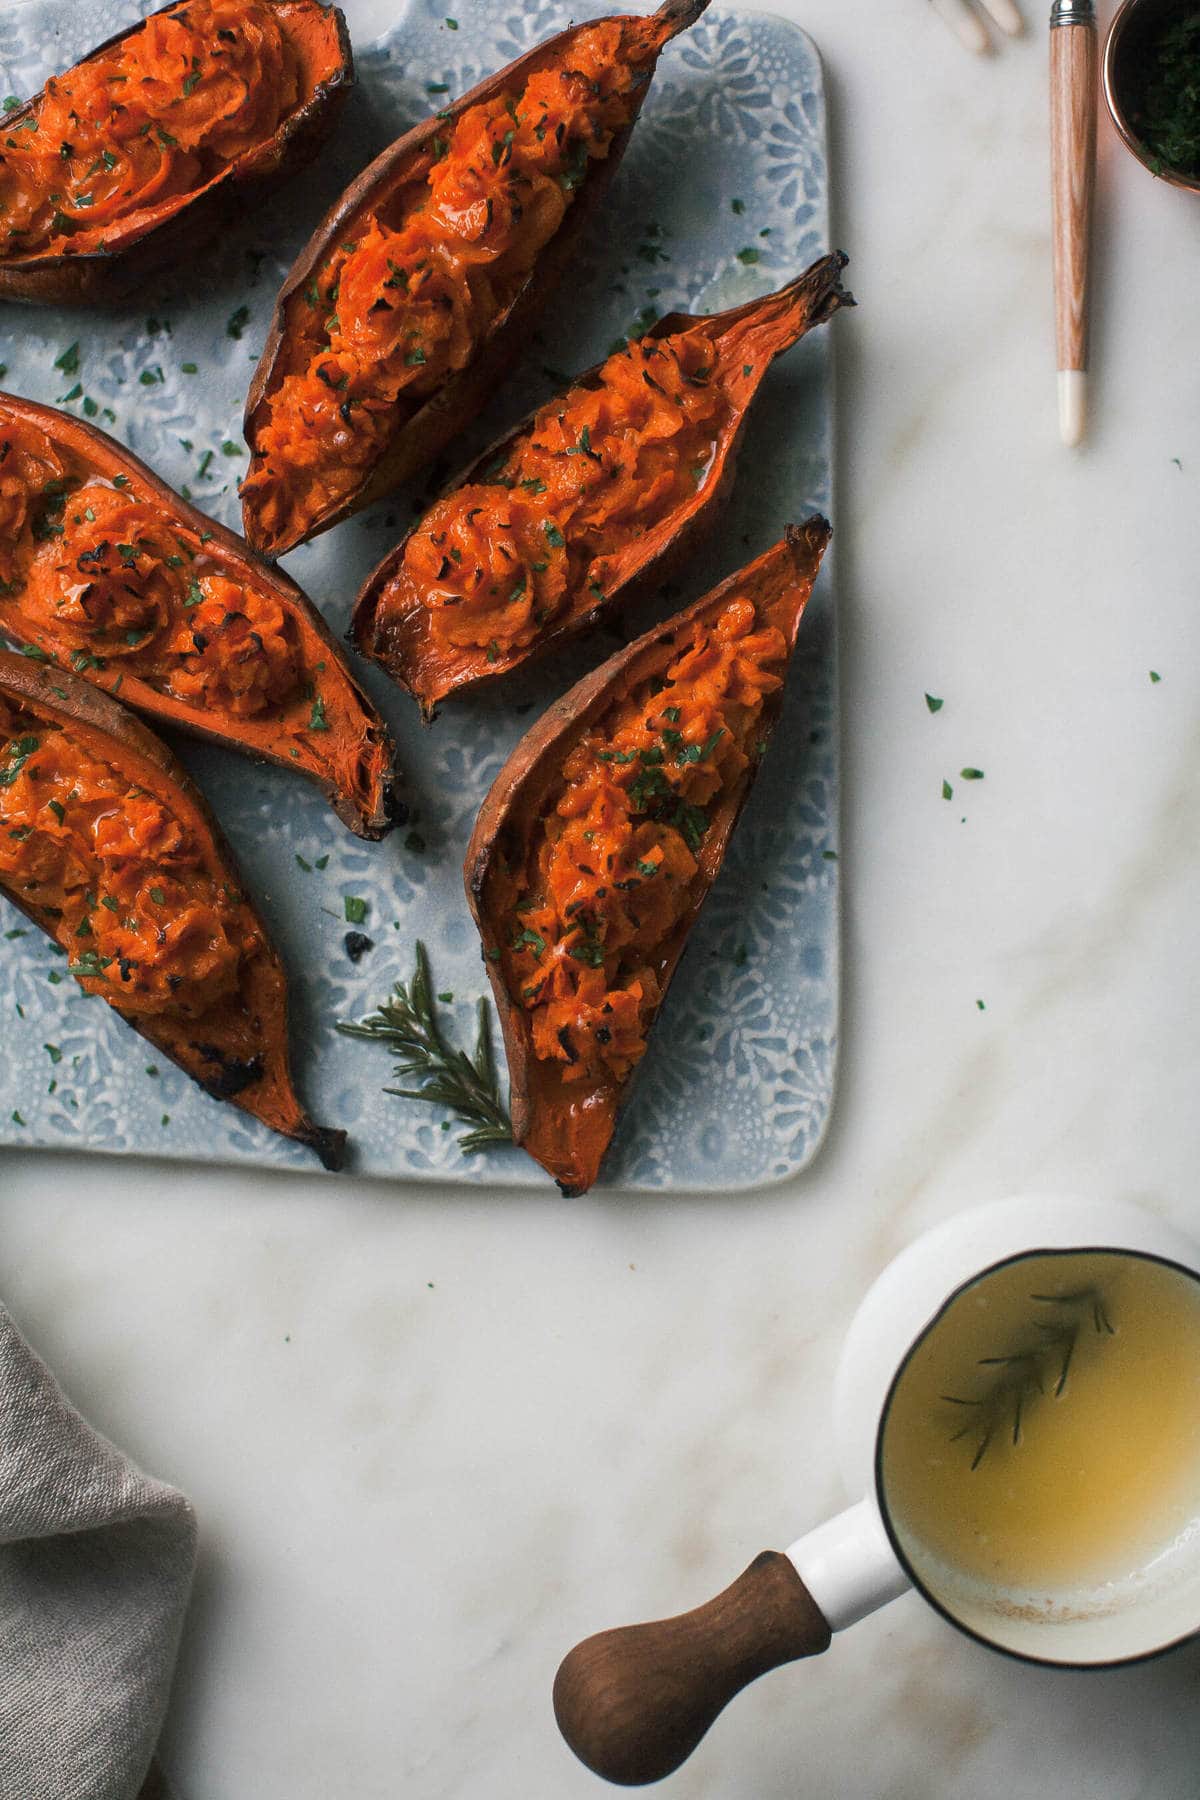 Double Baked Sweet Potato with Caramelized Onions + Comté + Rosemary Butter